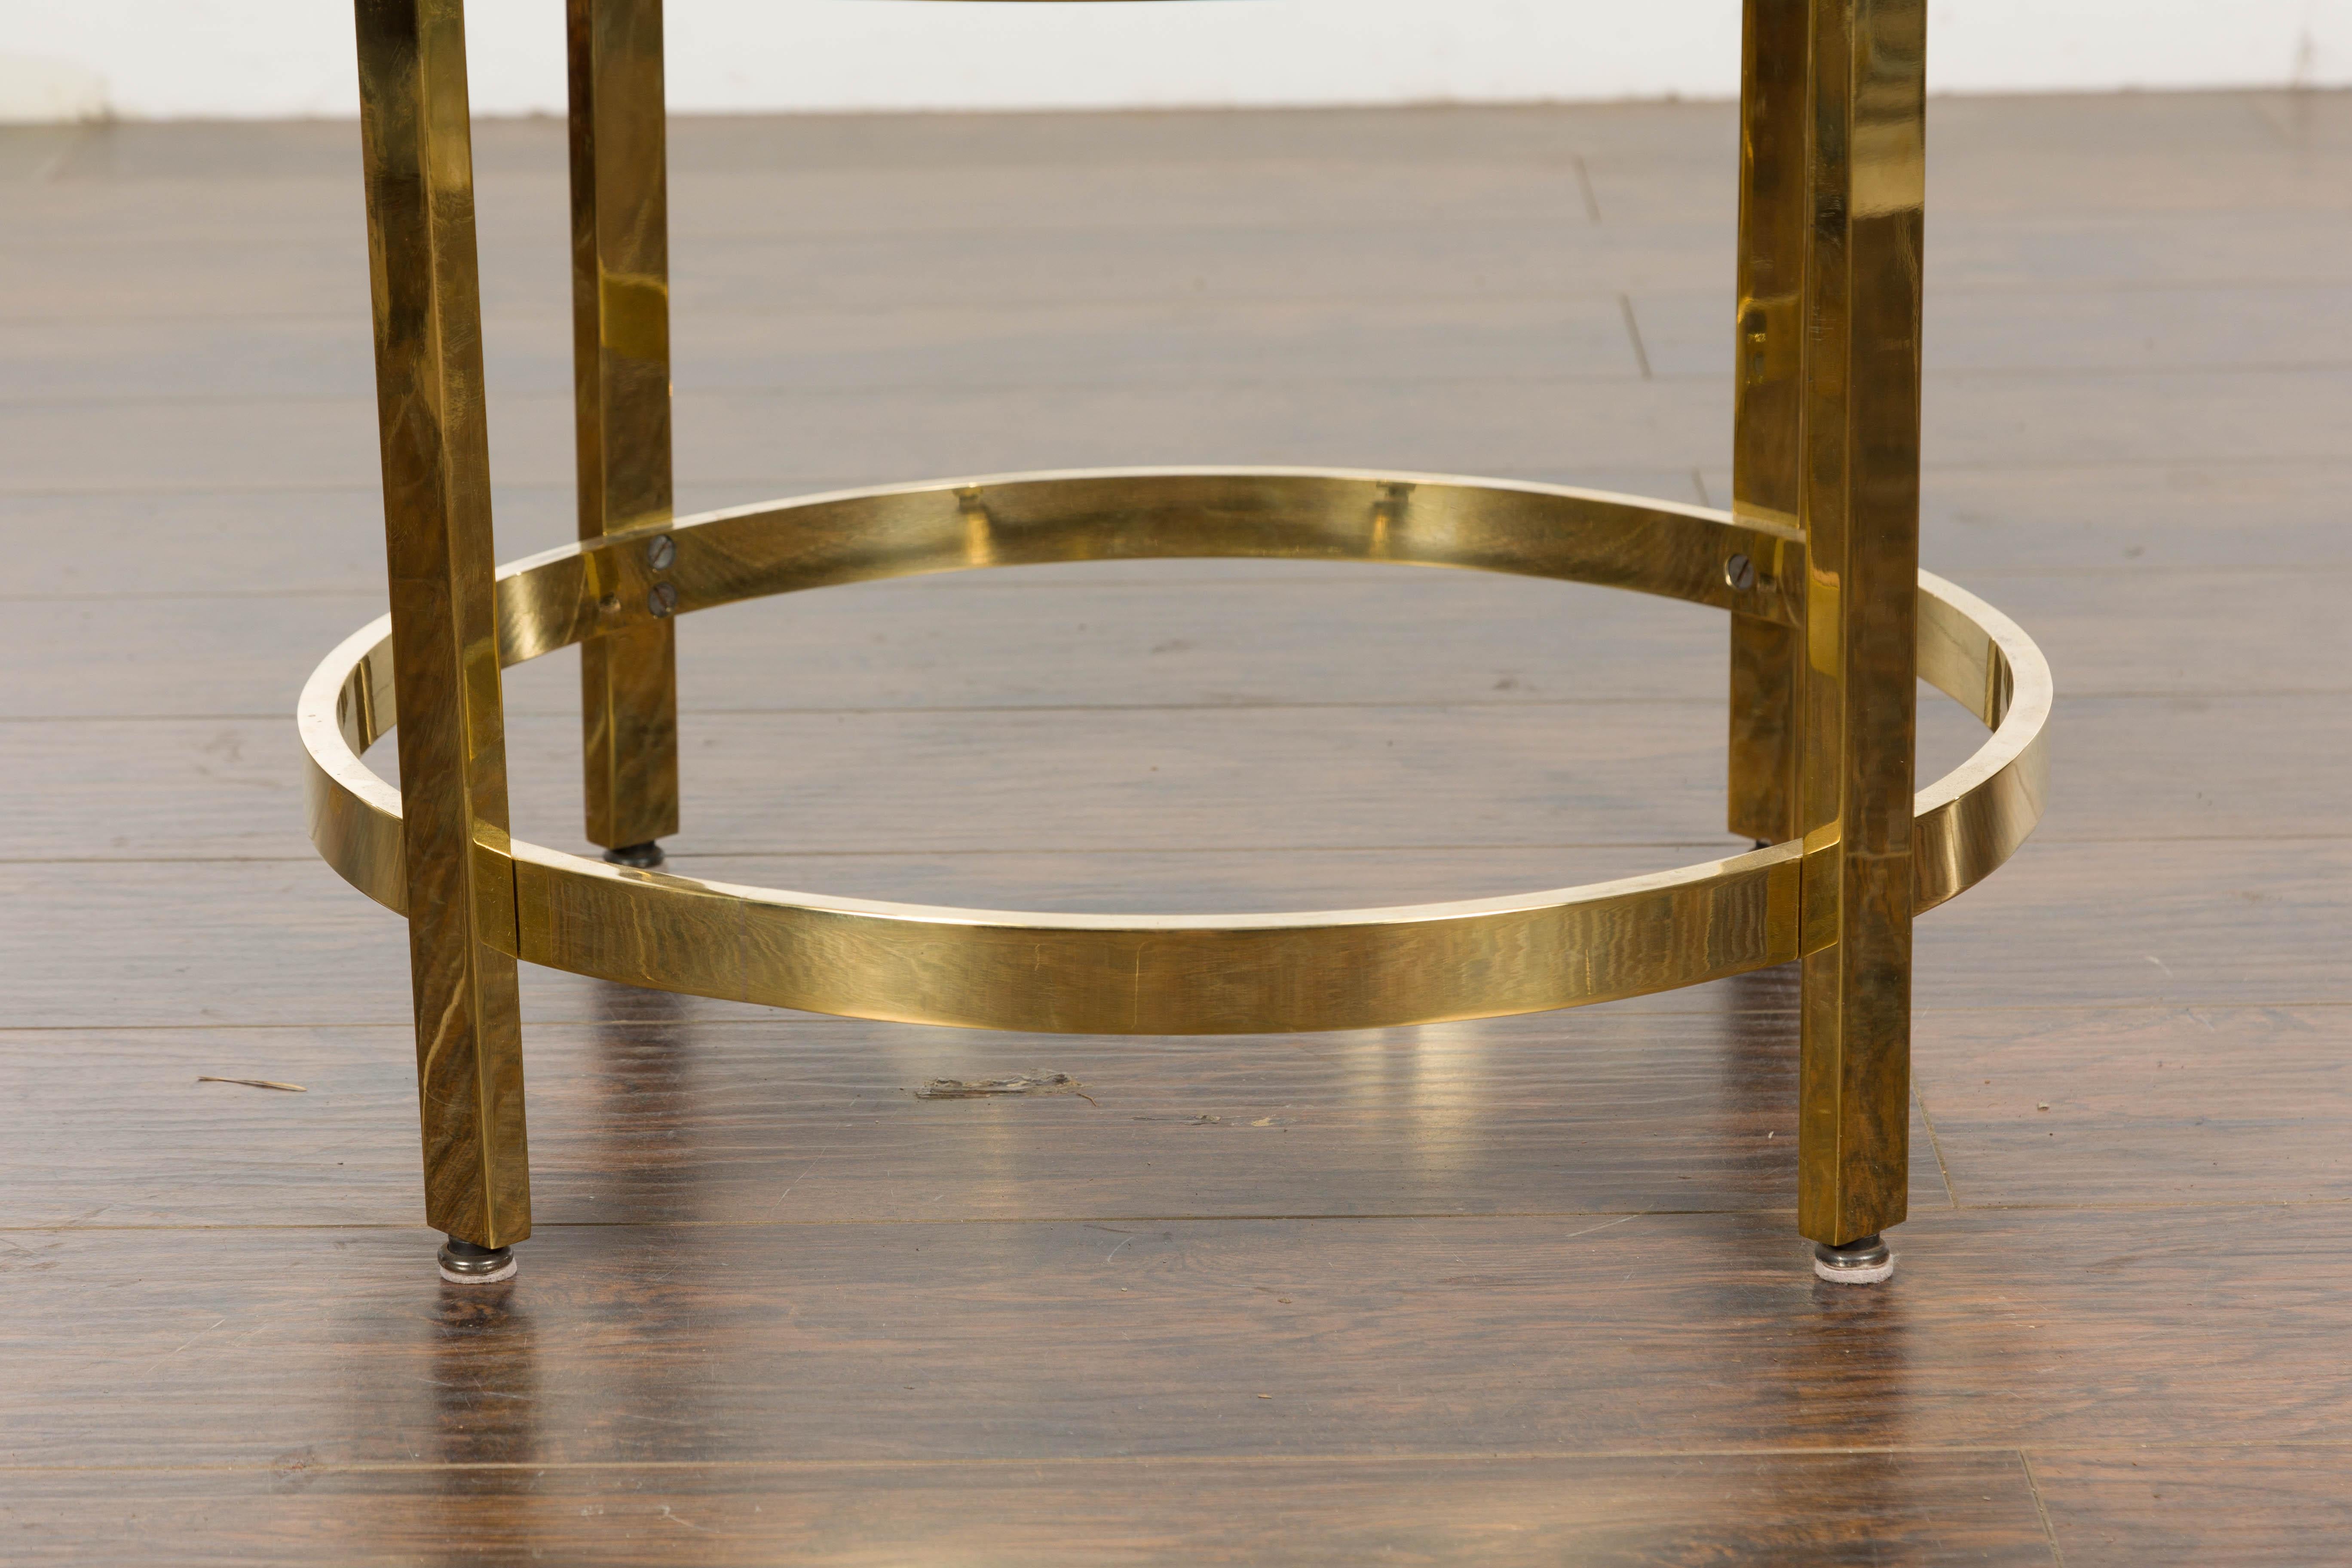 1950s Midcentury Italian Brass Side Table with Round Glass Top In Good Condition For Sale In Atlanta, GA